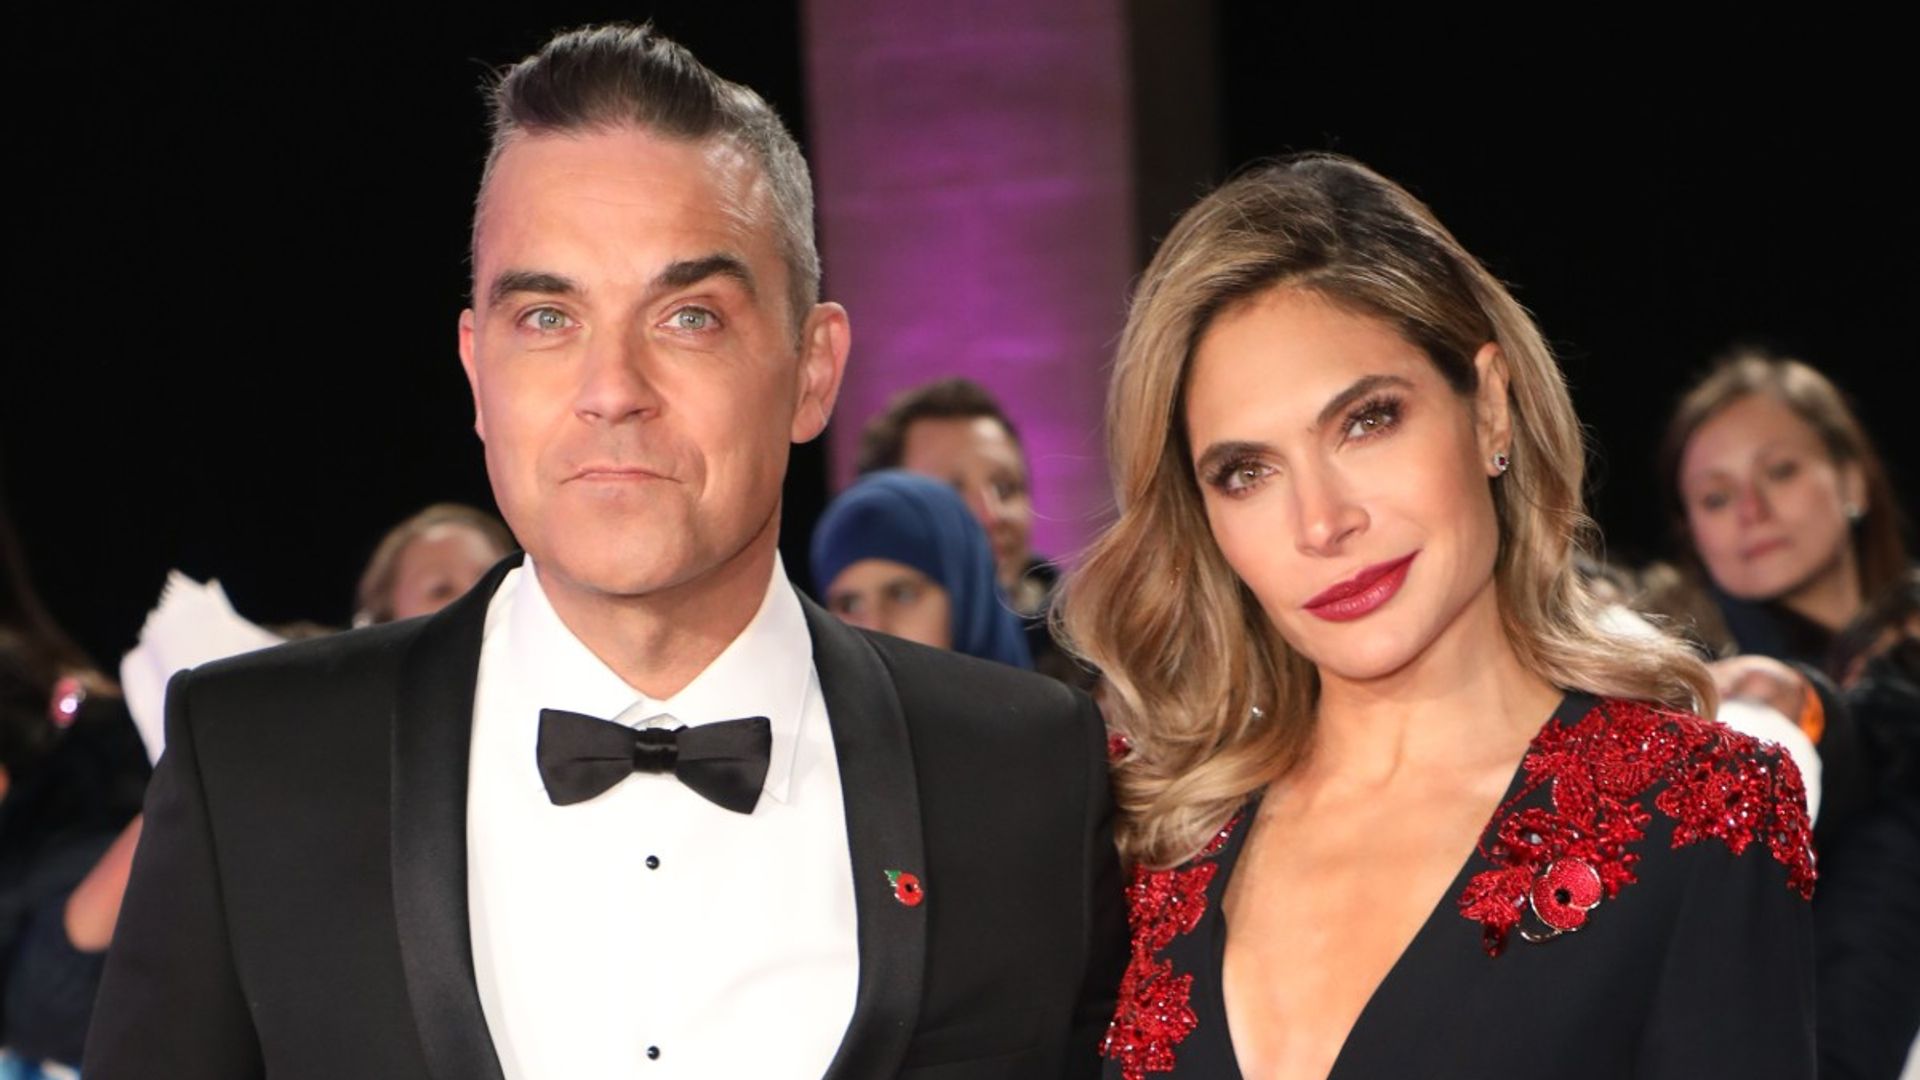 Ayda Field shares RARE photo of all three of her and Robbie Williams' children - see it here